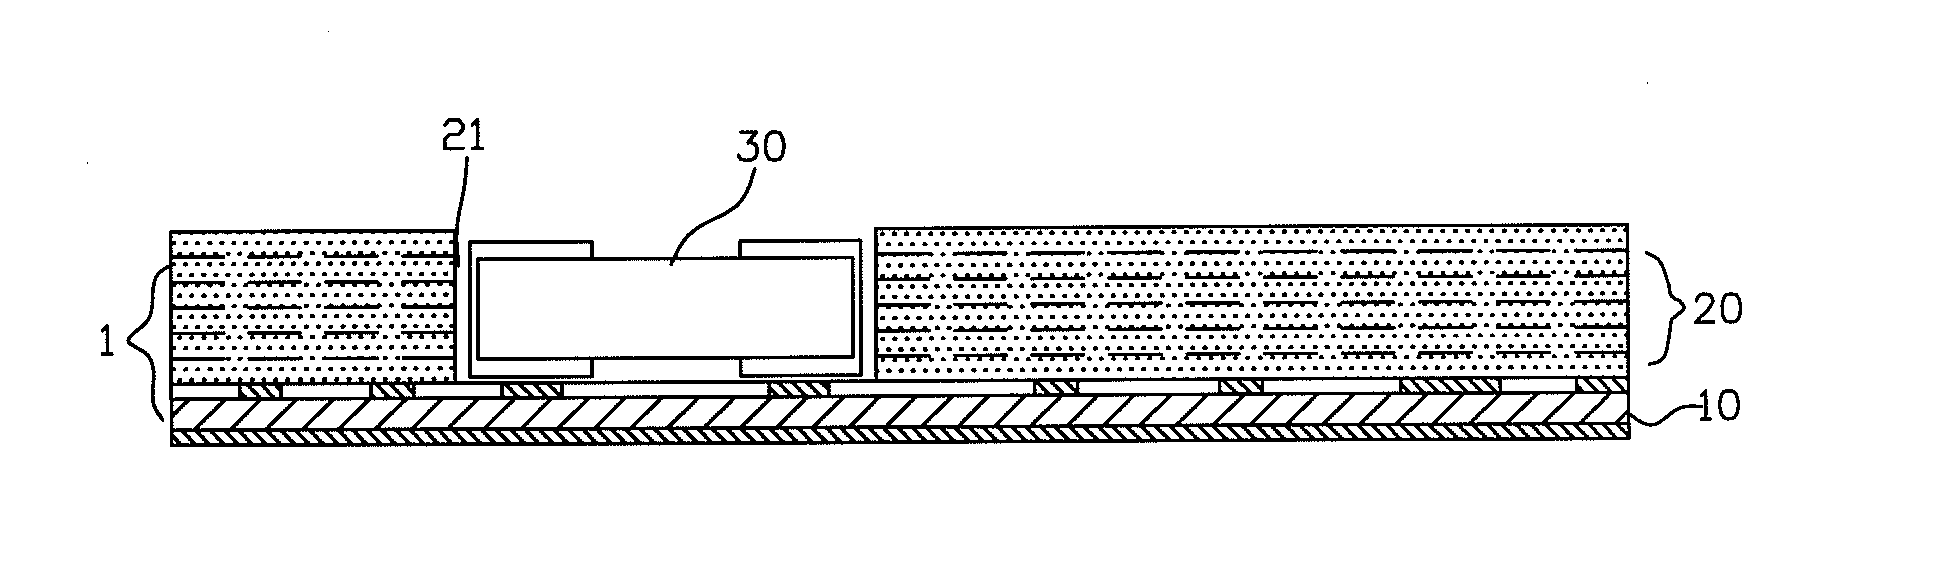 Method of manufacturing a multilayer printed circuit board with a built-in electronic device